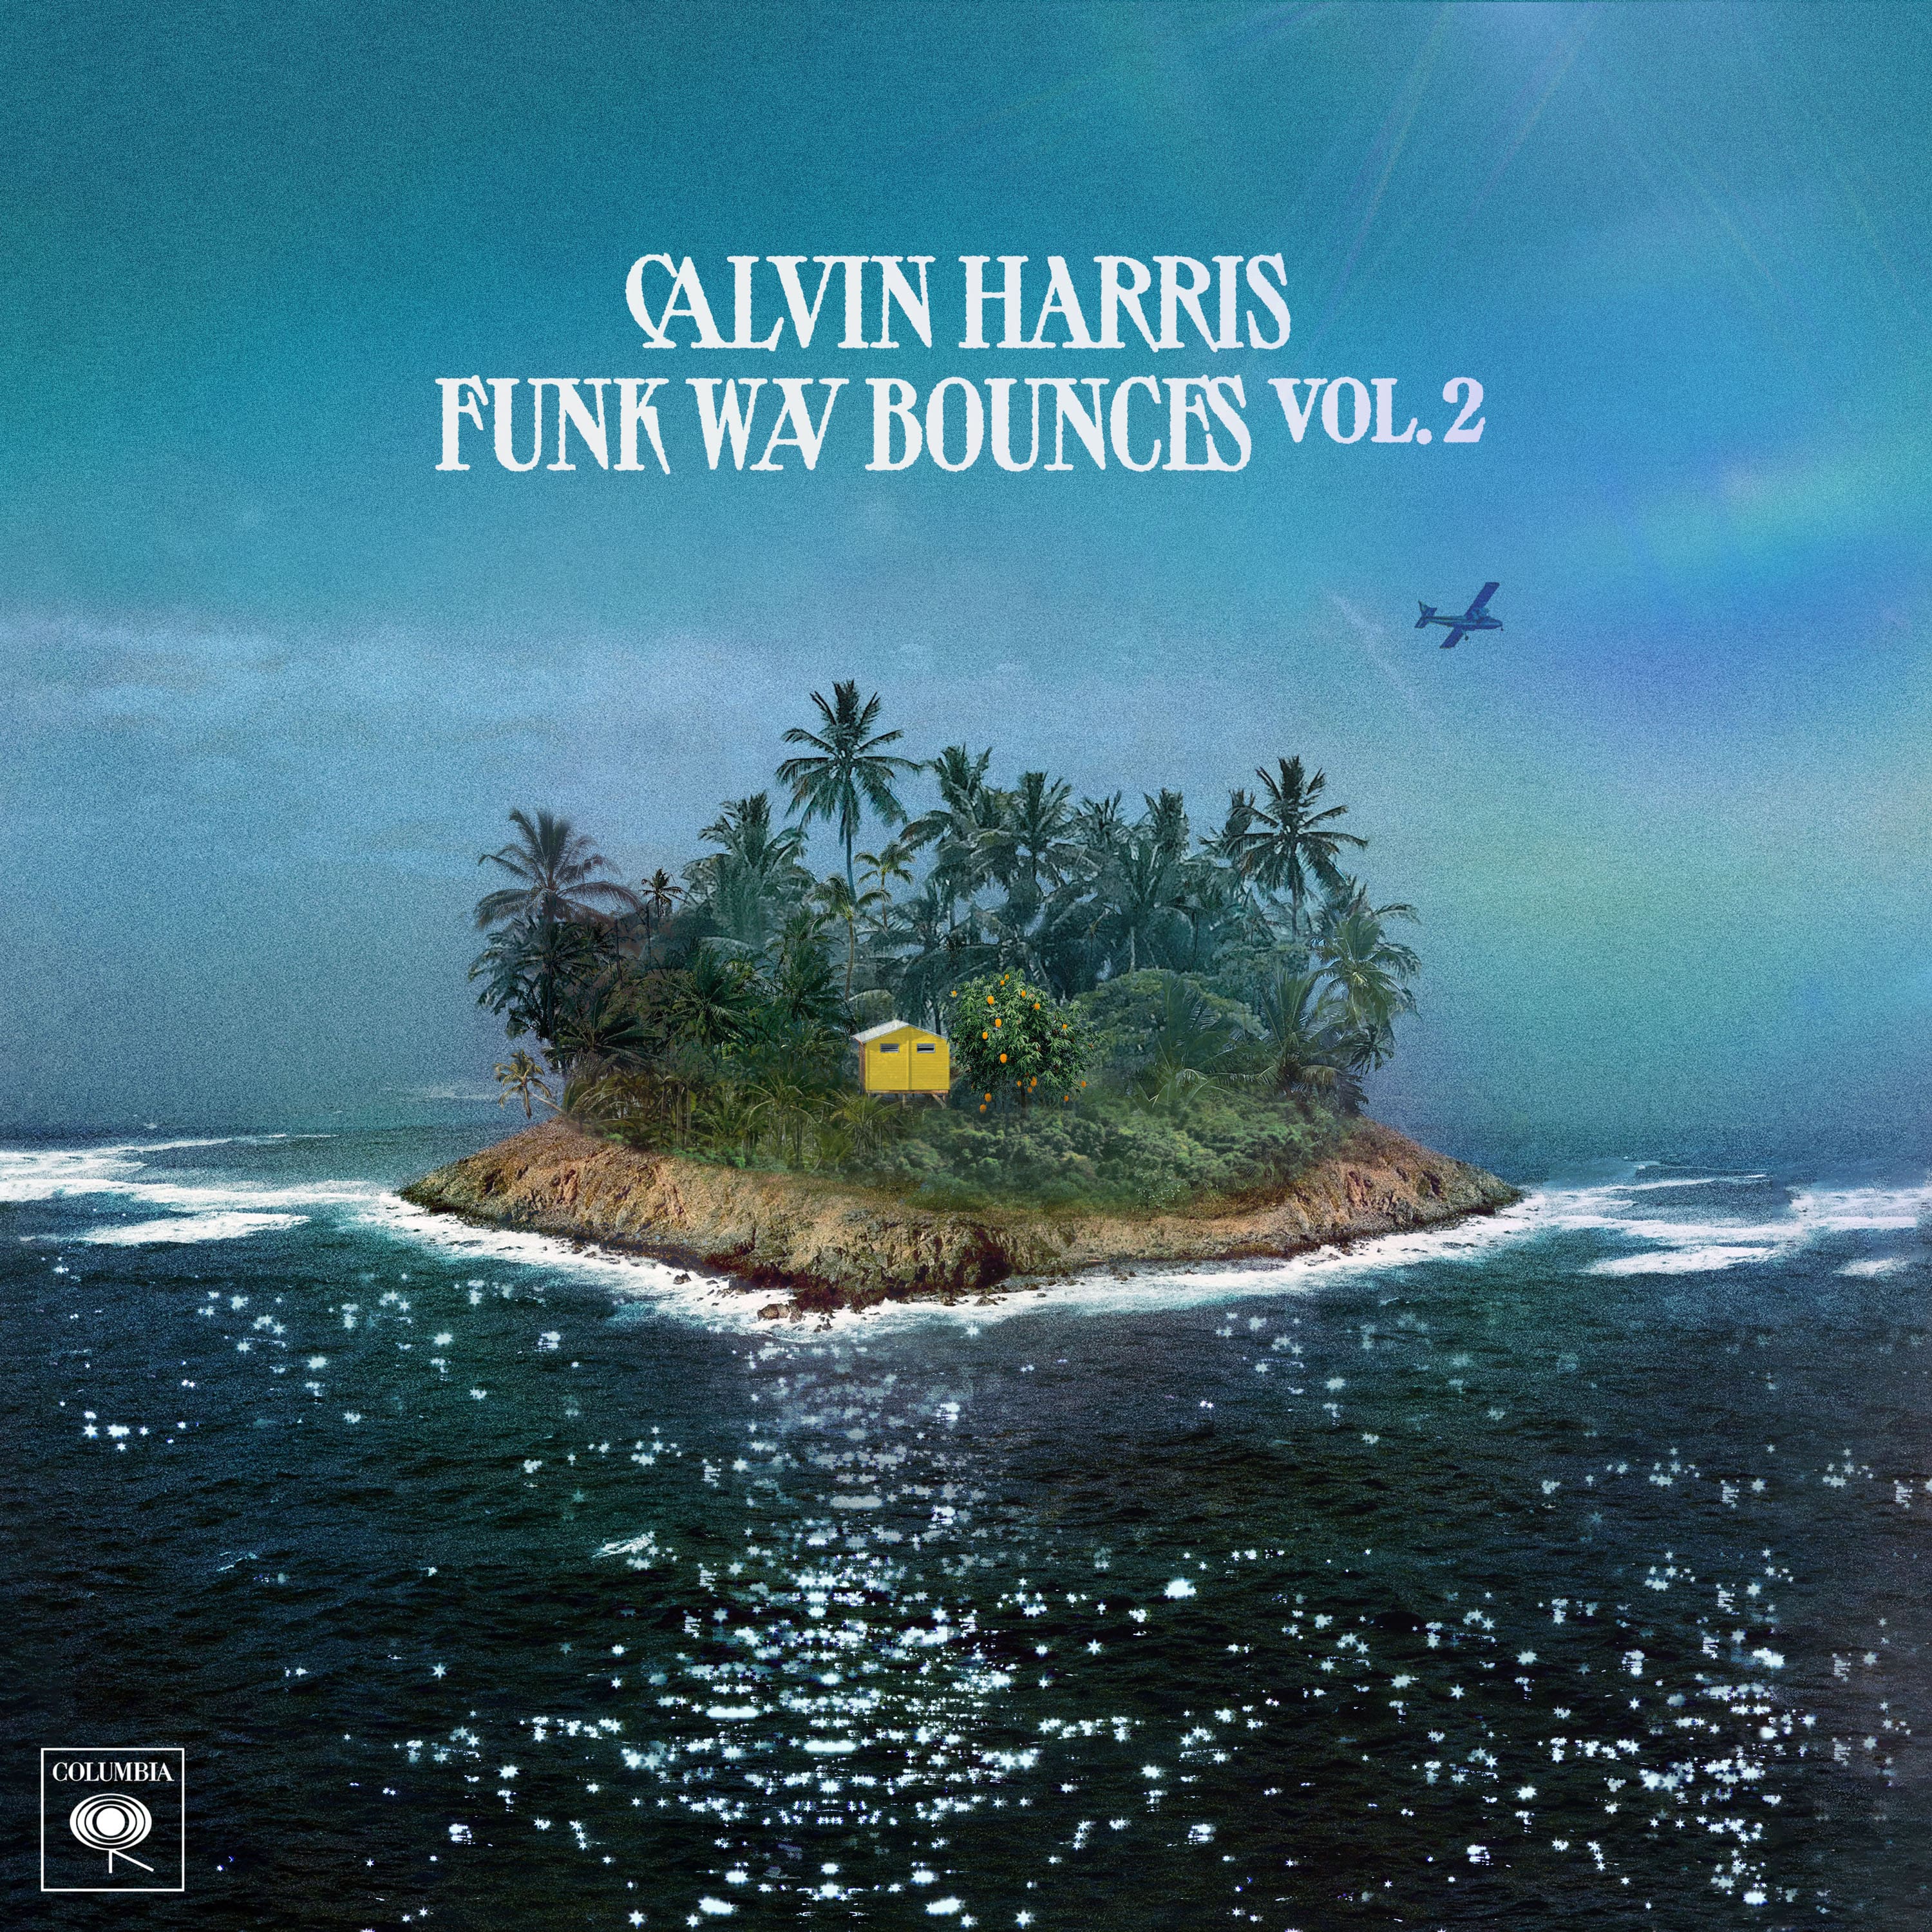 CALVIN HARRIS RELEASES NEW ALBUM FUNK WAV BOUNCES VOL. 2 OUT EVERYWHERE NOW